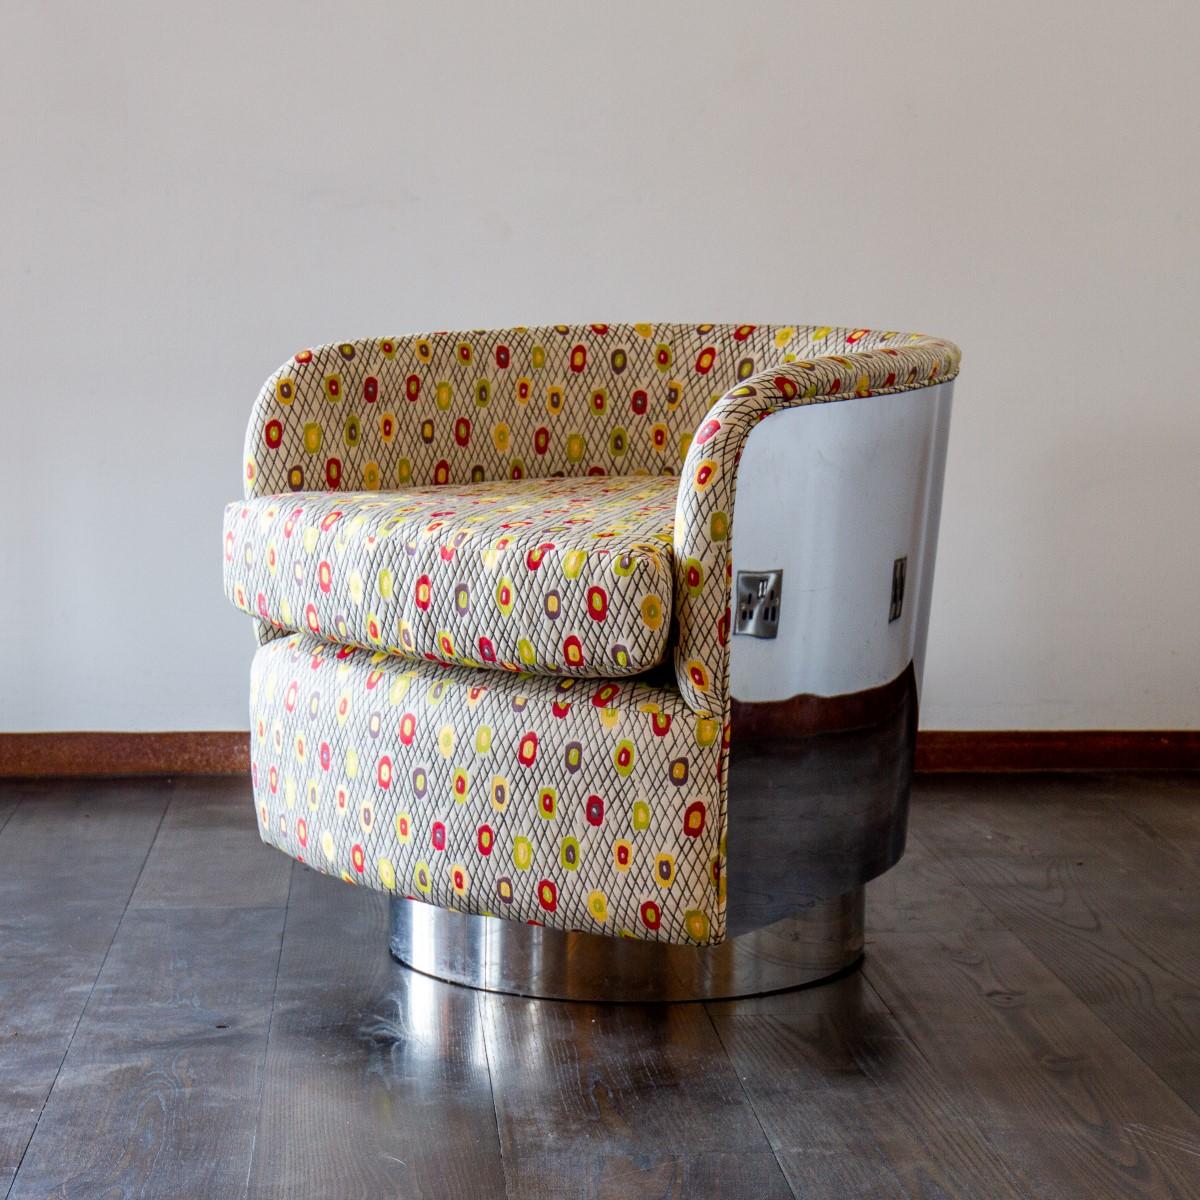 Sensational single Milo Baughman designed upholstered swivel and tilting metal wrapped tub chair, upholstered in a luxurious and colourful patterned jacquard fabric (woven with Silk, Linen and Cotton)  1970s 

This model rarely comes to the market.